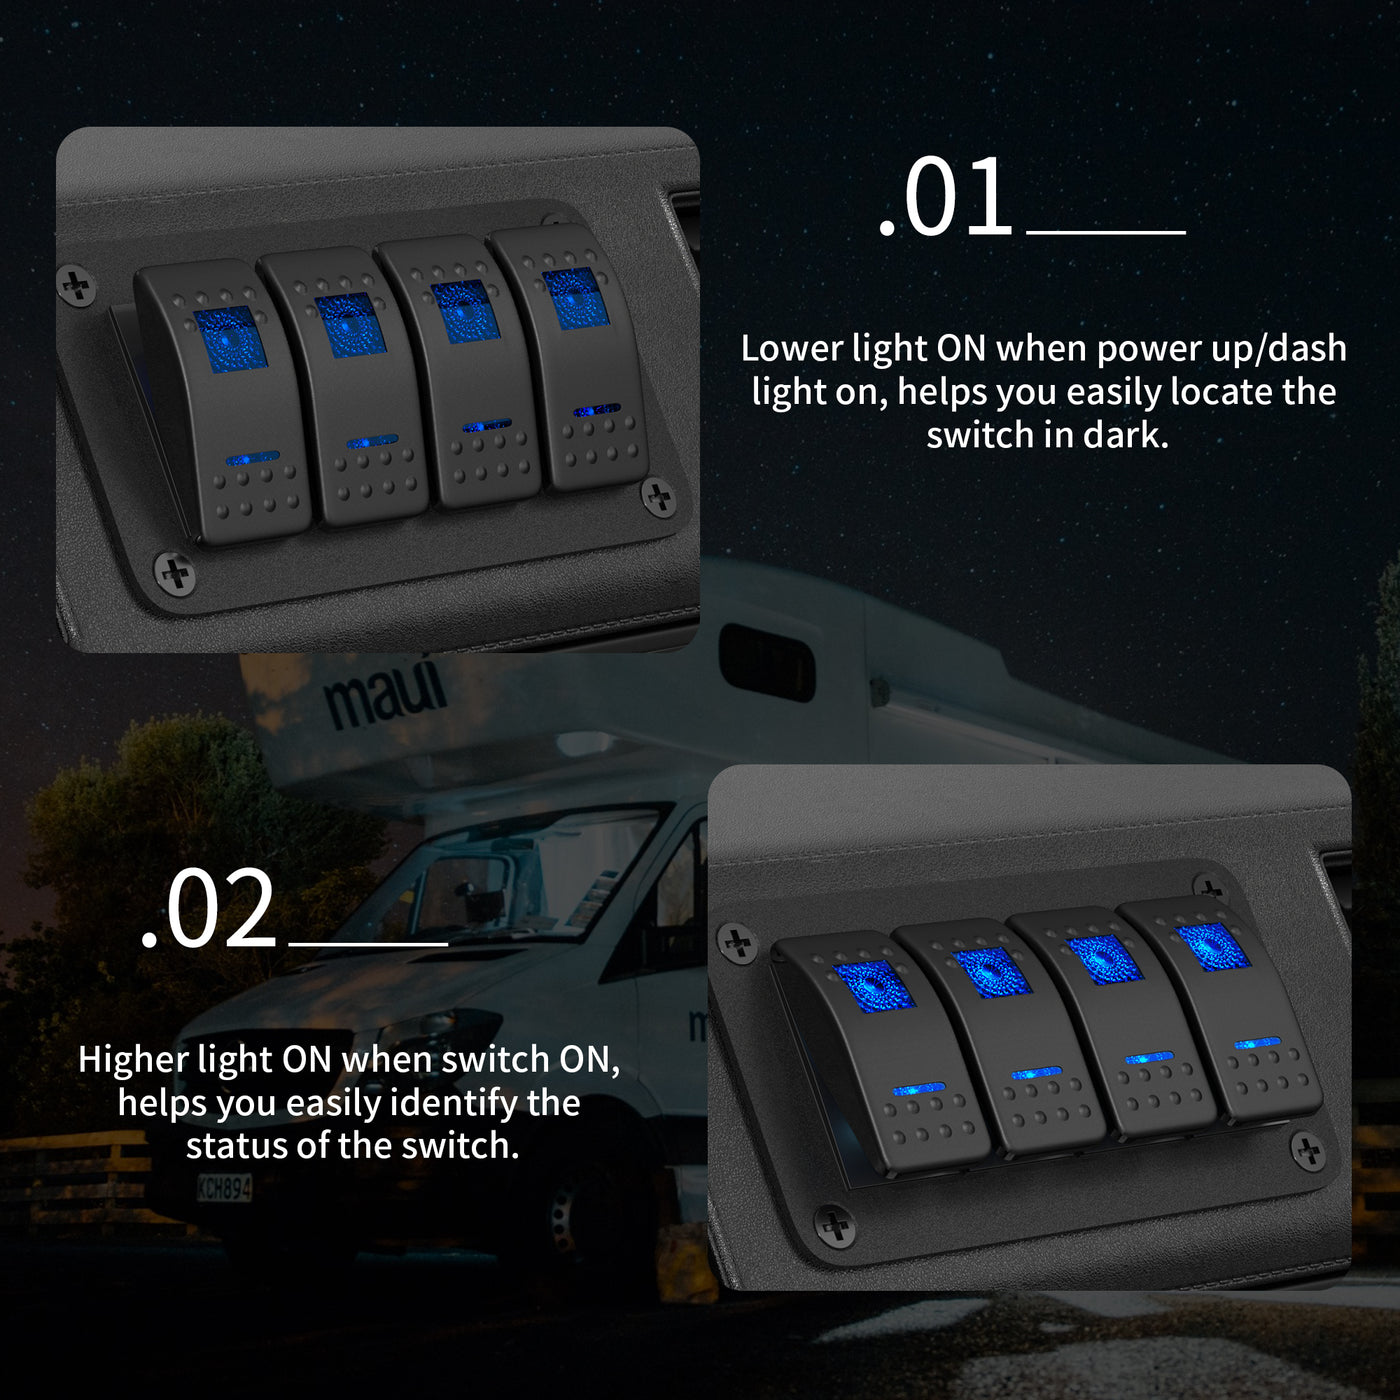 12V 4 Gang Dual Light Switch Panel with Sticker